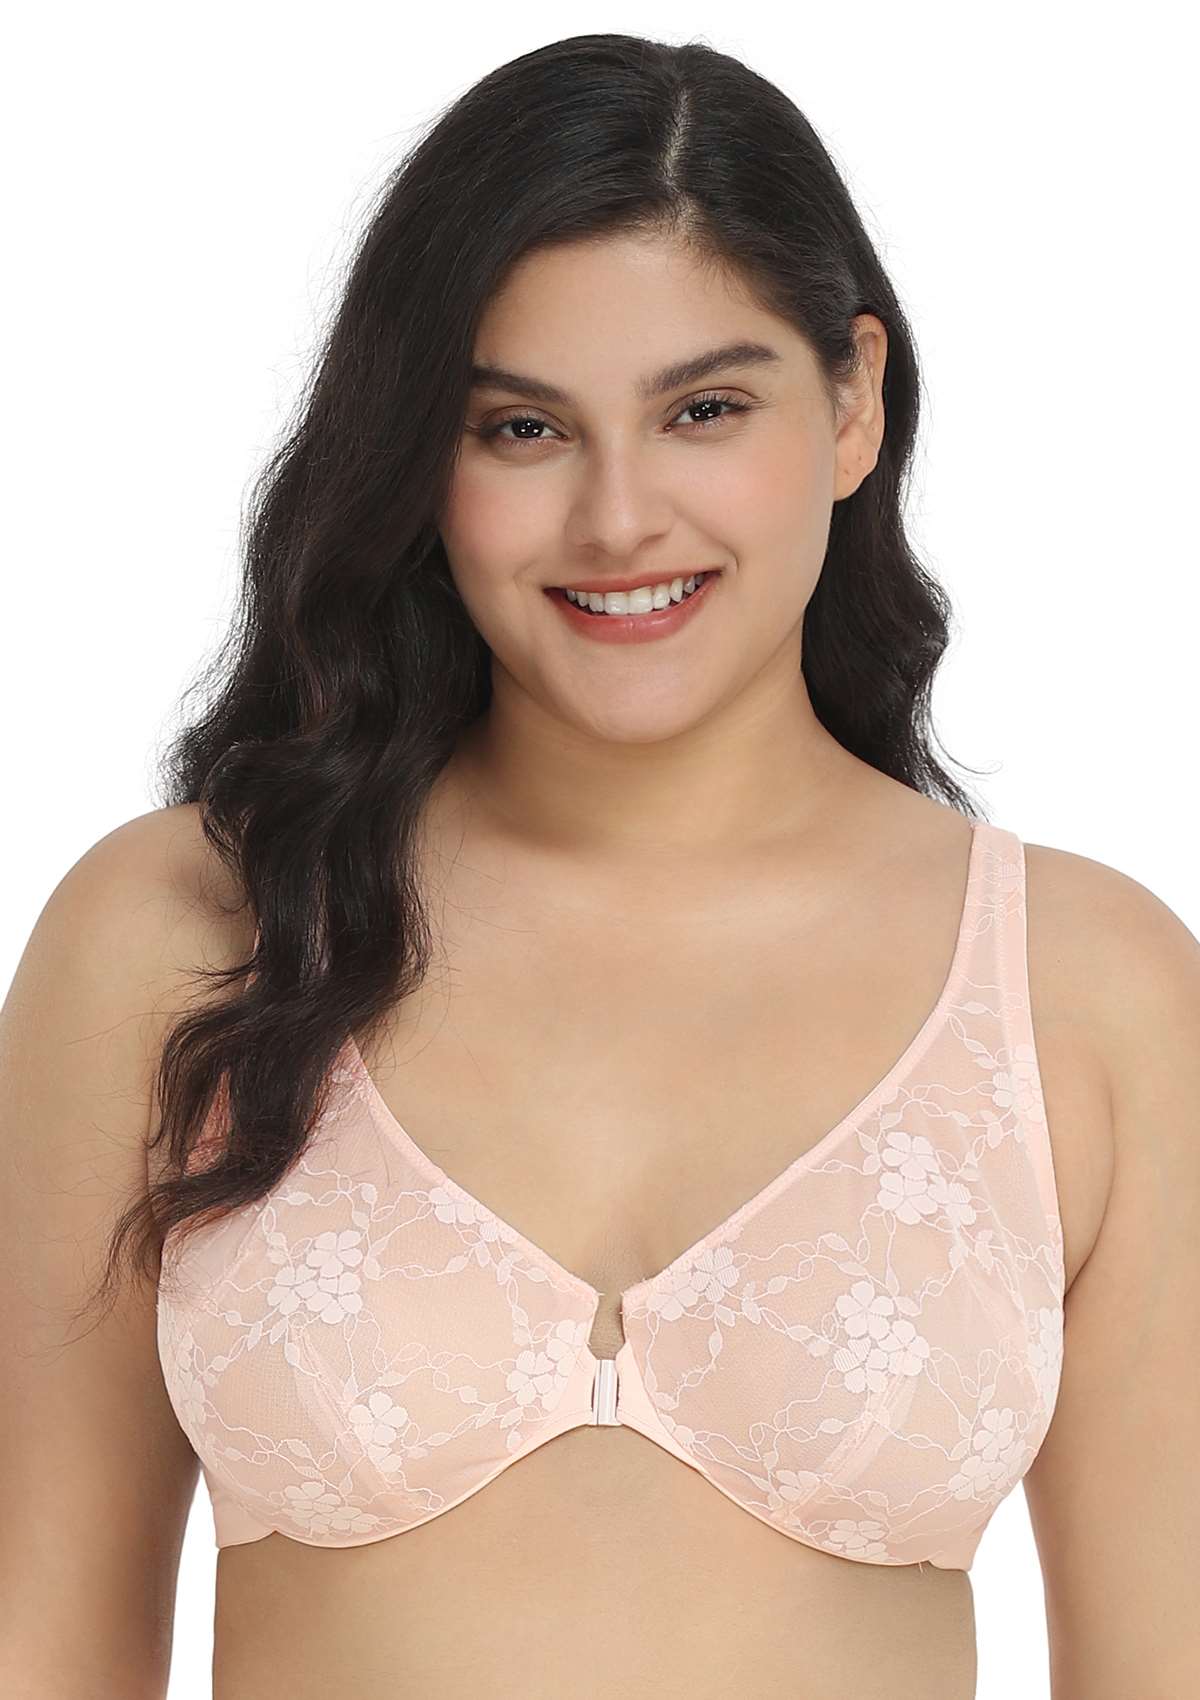 HSIA Spring Romance Front-Close Floral Lace Unlined Full Coverage Bra - White / 36 / H